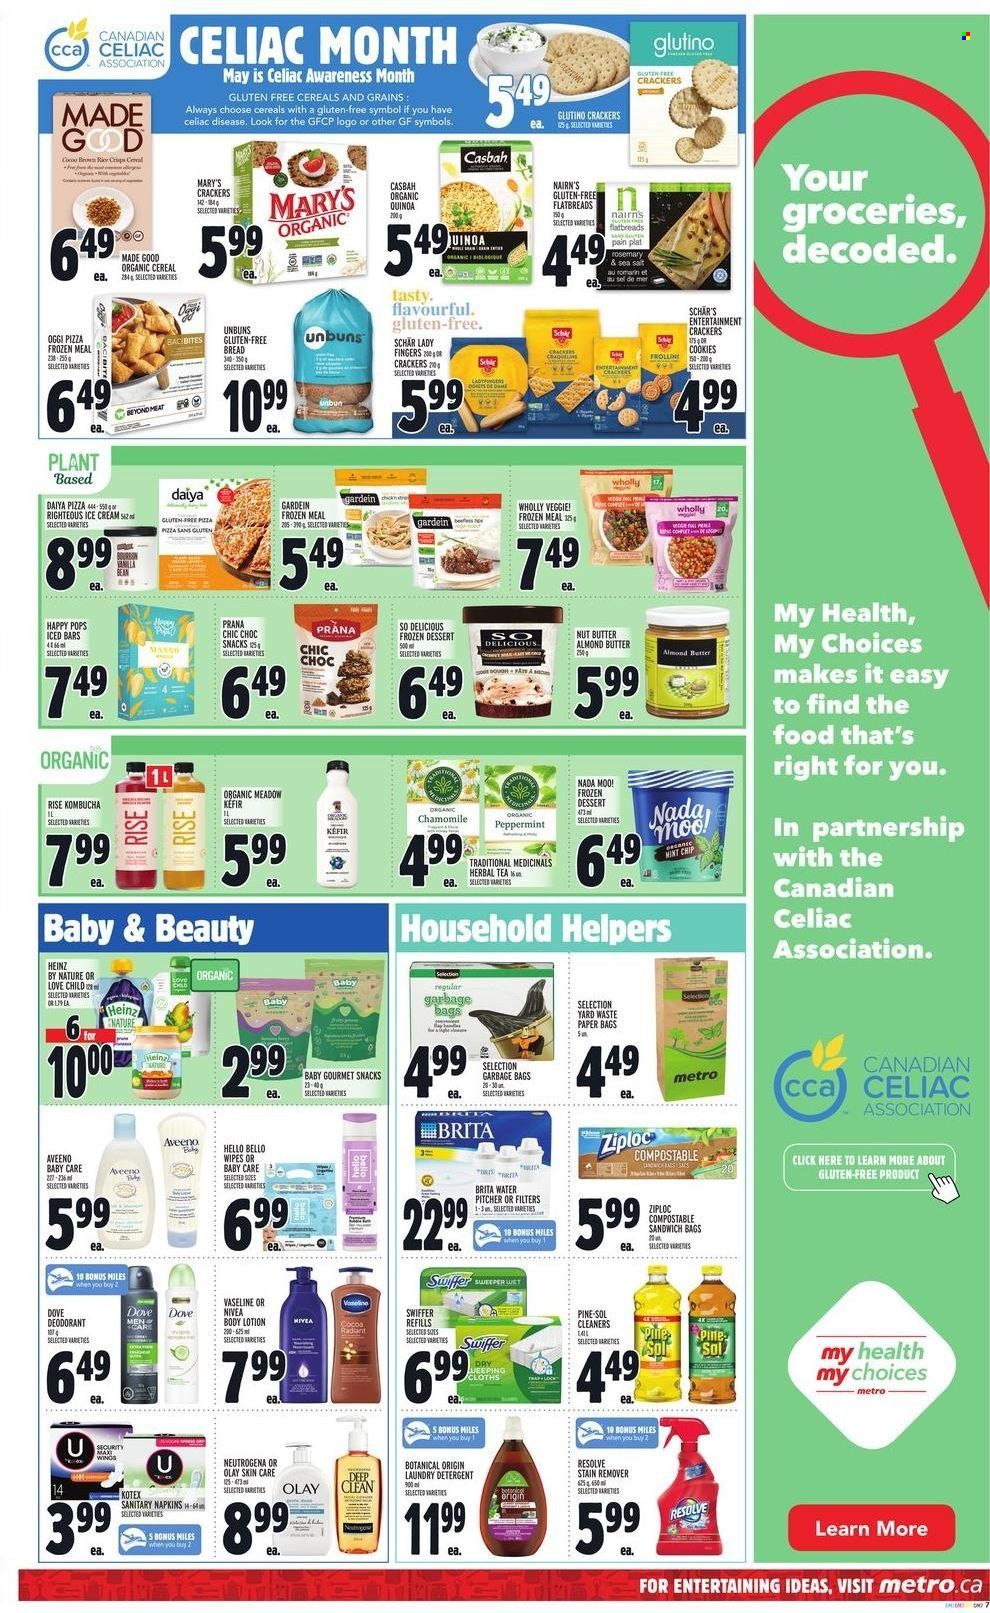 thumbnail - Metro Flyer - May 12, 2022 - May 18, 2022 - Sales products - bread, kefir, almond butter, ice cream, cookies, lady fingers, snack, crackers, cereals, rosemary, nut butter, kombucha, tea, herbal tea, wipes, Aveeno, stain remover, Pine-Sol, Swiffer, laundry detergent, Vaseline, Kotex, Olay, anti-perspirant, Yard, bag, Ziploc, pitcher, paper, detergent, Dove, Neutrogena, Heinz, Nivea, deodorant. Page 9.